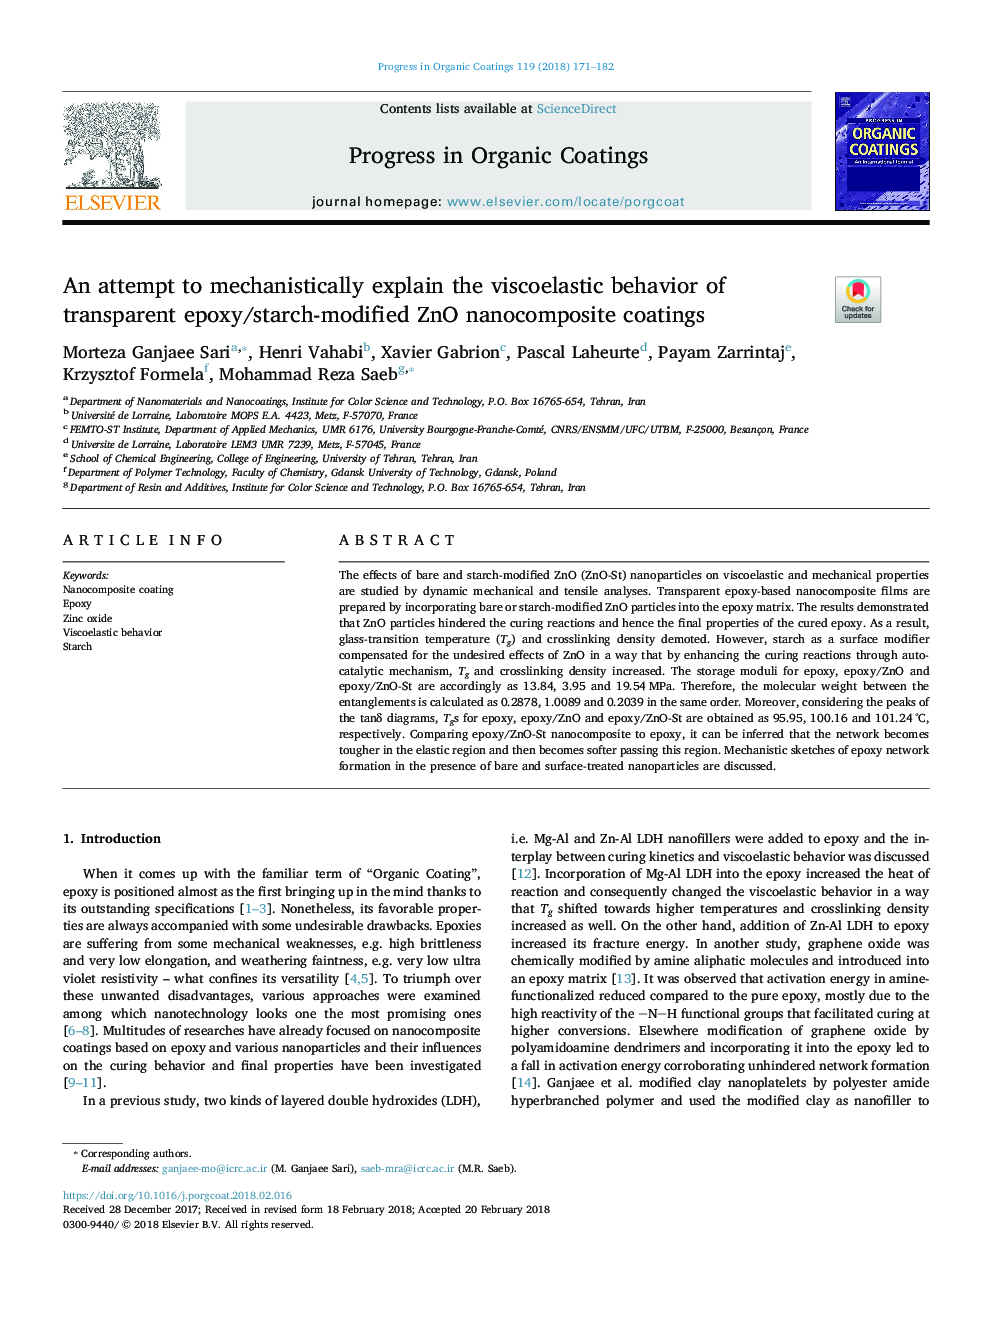 An attempt to mechanistically explain the viscoelastic behavior of transparent epoxy/starch-modified ZnO nanocomposite coatings